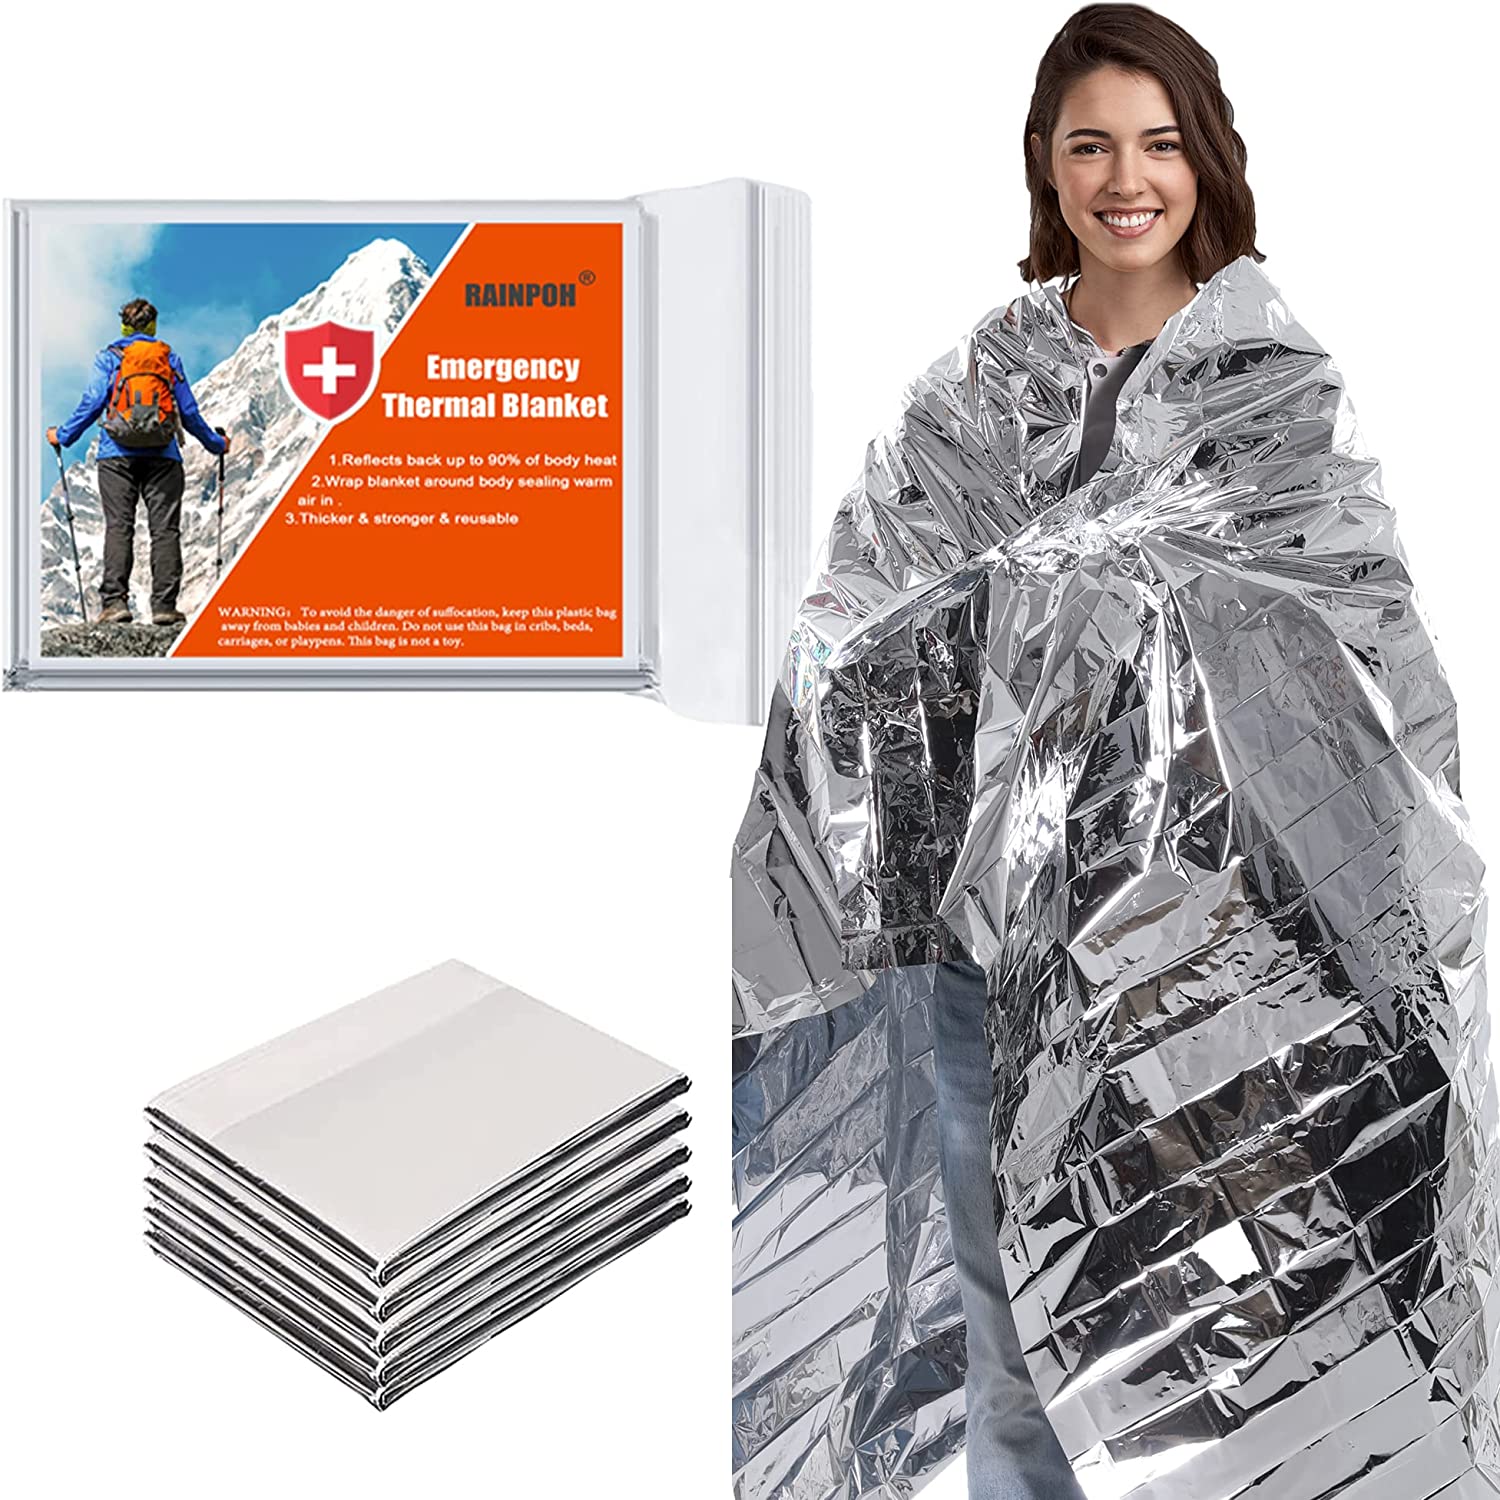 RAINPOH Emergency Mylar Thermal Blanket 82*64 in(10 Pack), Gigantic Space Blanket, Survival Blankets Heavy Duty Camping Gear, First Aid, Silver